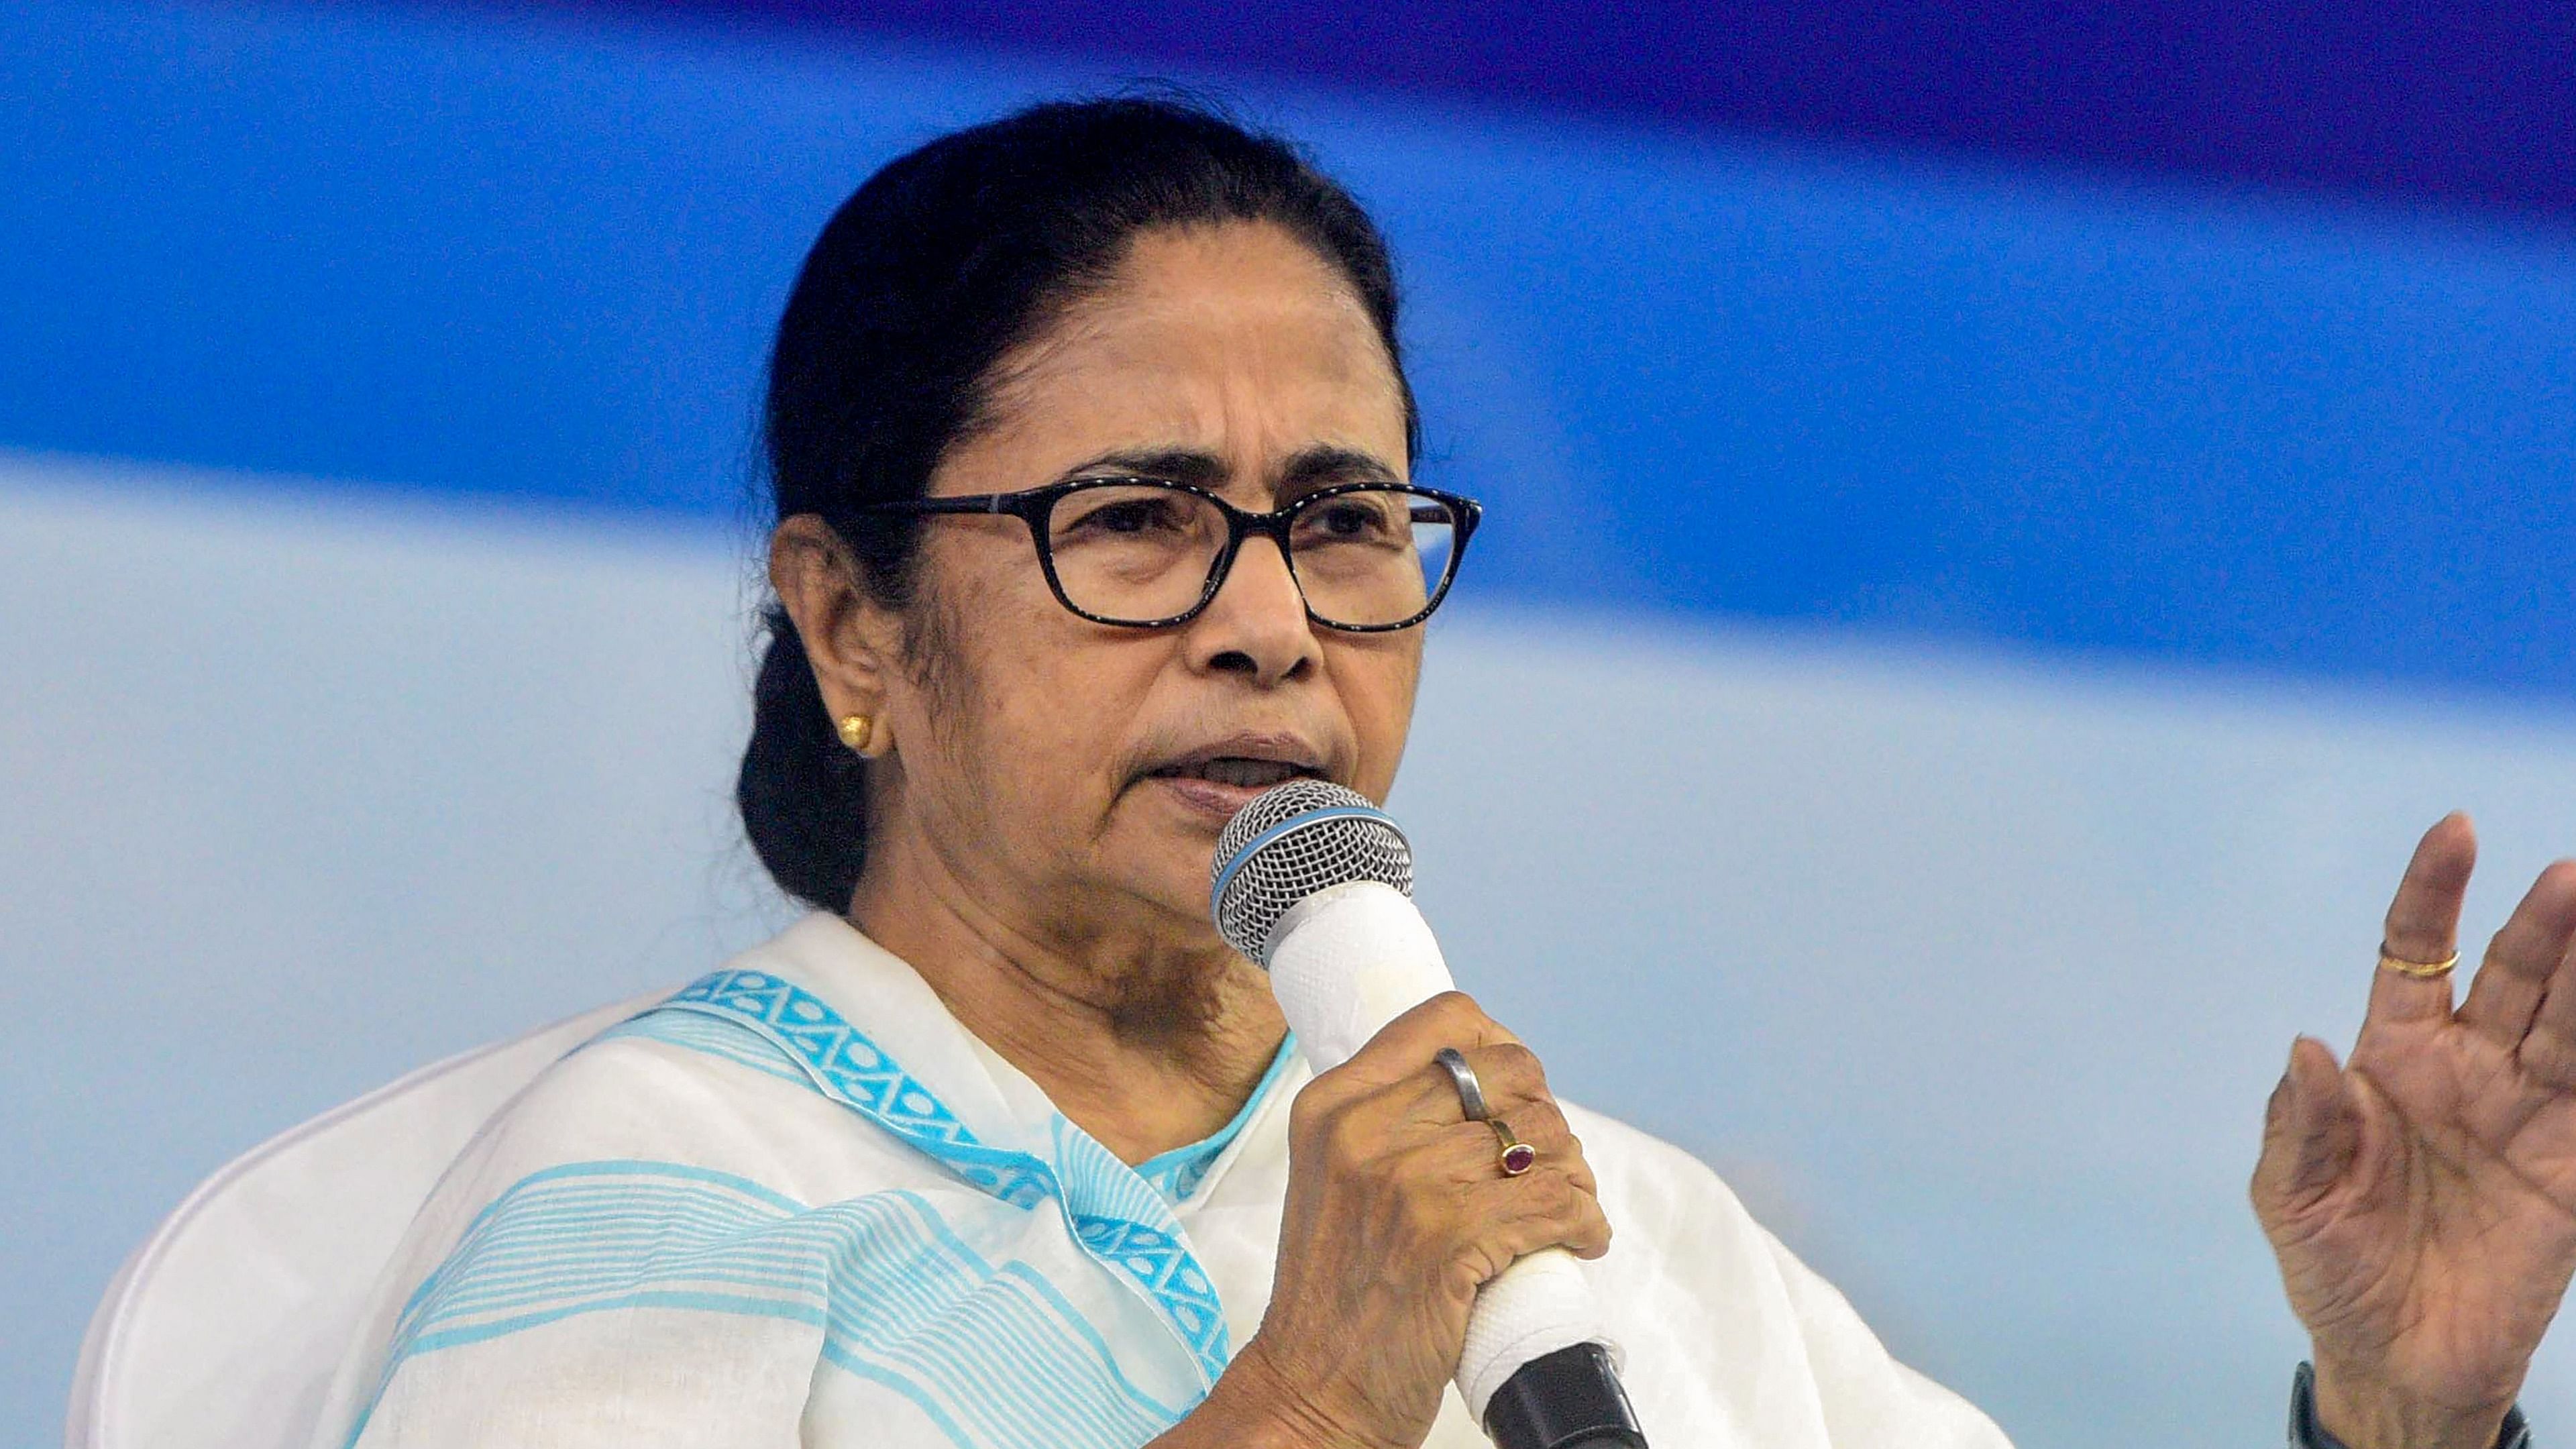 Union Tribal Affairs Minister Arjun Munda also demanded that West Bengal Chief Minister Mamata Banerjee tender a public apology for Giri's comments. Credit: PTI Photo